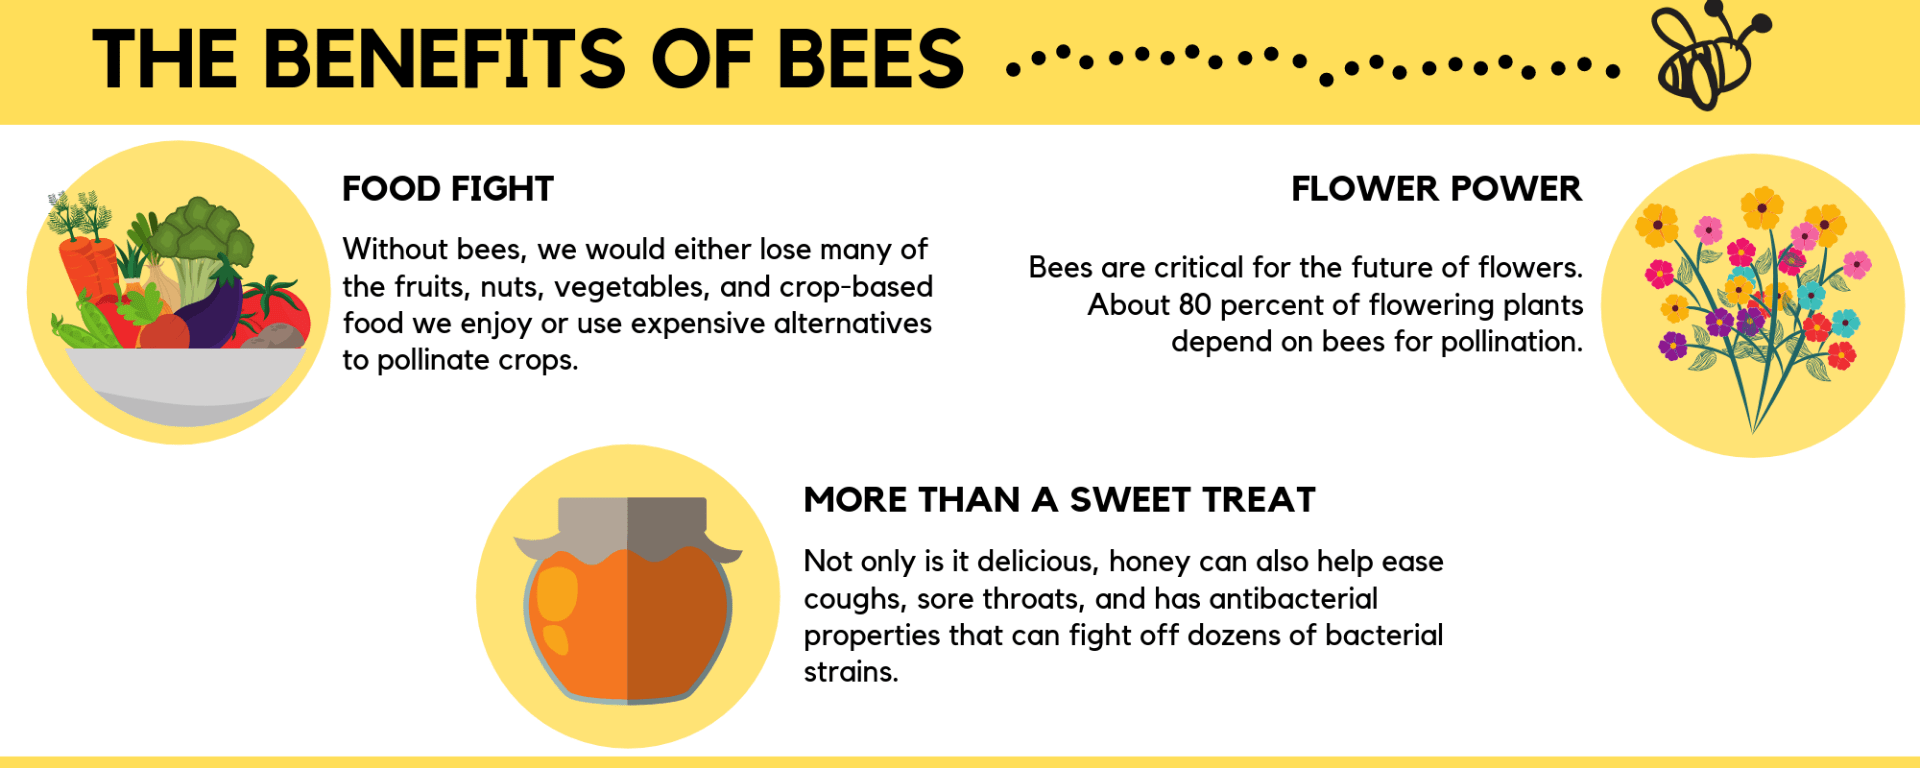 Benefits of Bees: 1) Without bees we would either lose many of the fruits, nuts , vegetables, and crop-based food we enjoy or use expensive alternatives to pollinate crops, 2) Not only is it delicions, honey can also help ease coughs, sore throats, and has antibacterial properties that can fight off dozens of bacterial strains, 3) Bees are critical for the future of flowers. About 80 percent of the flowering plants depend on bees for pollination.